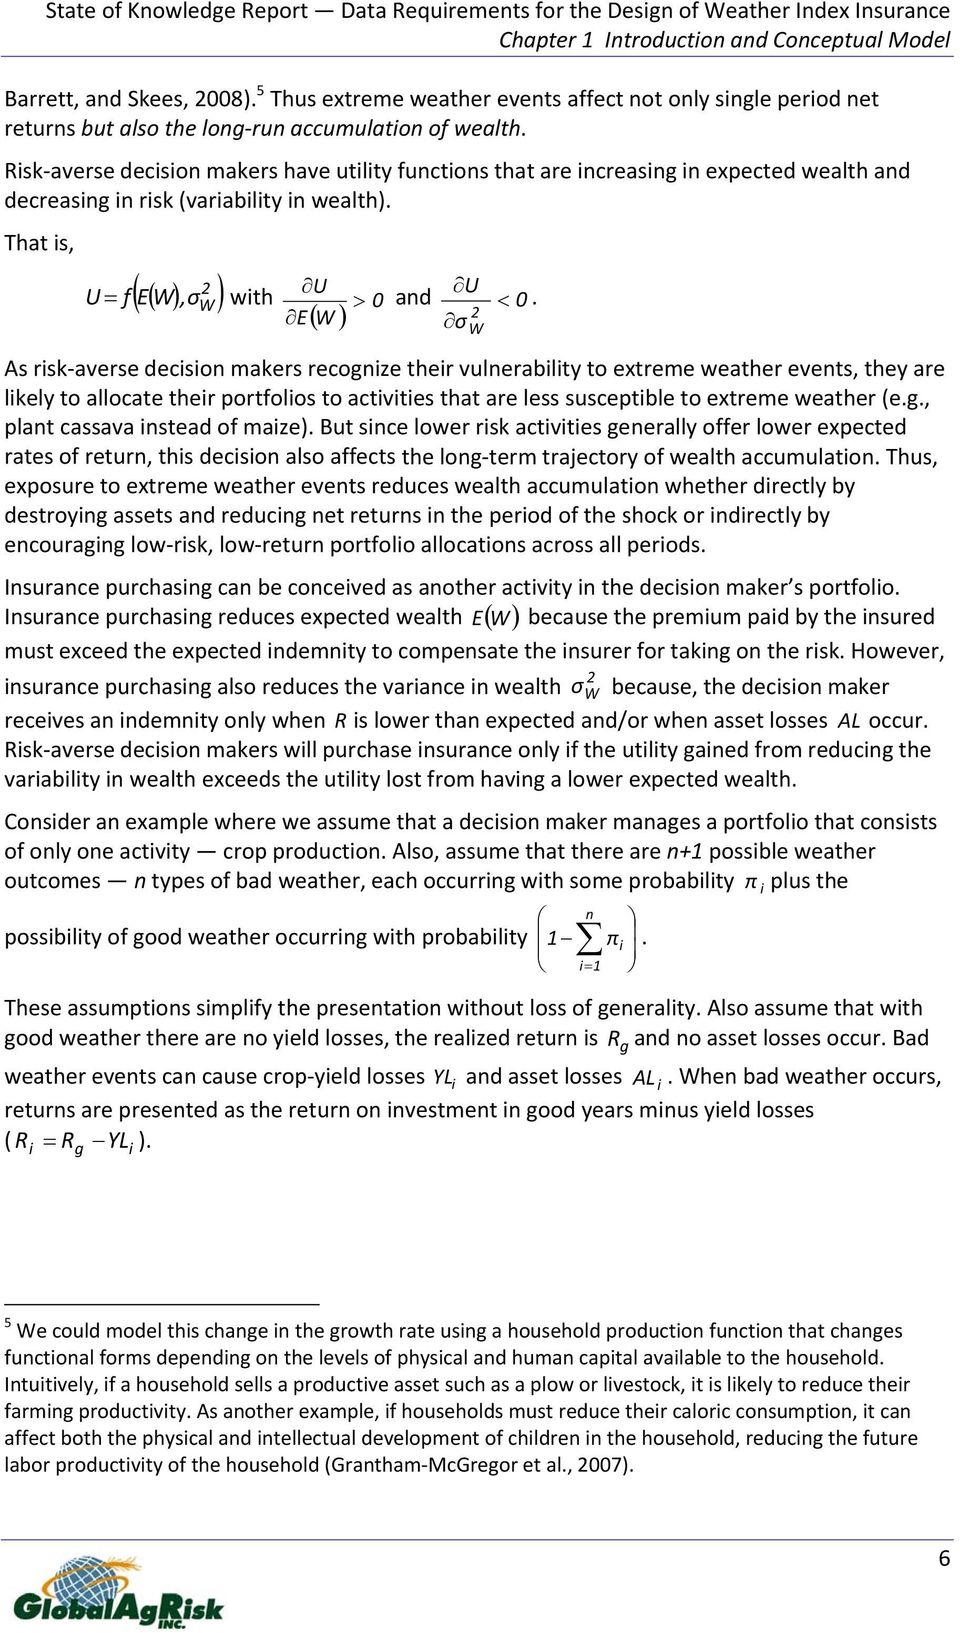 E( W ) 2 σ W As risk averse decision makers recognize their vulnerability to extreme weather events, they are likely to allocate their portfolios to activities that are less susceptible to extreme